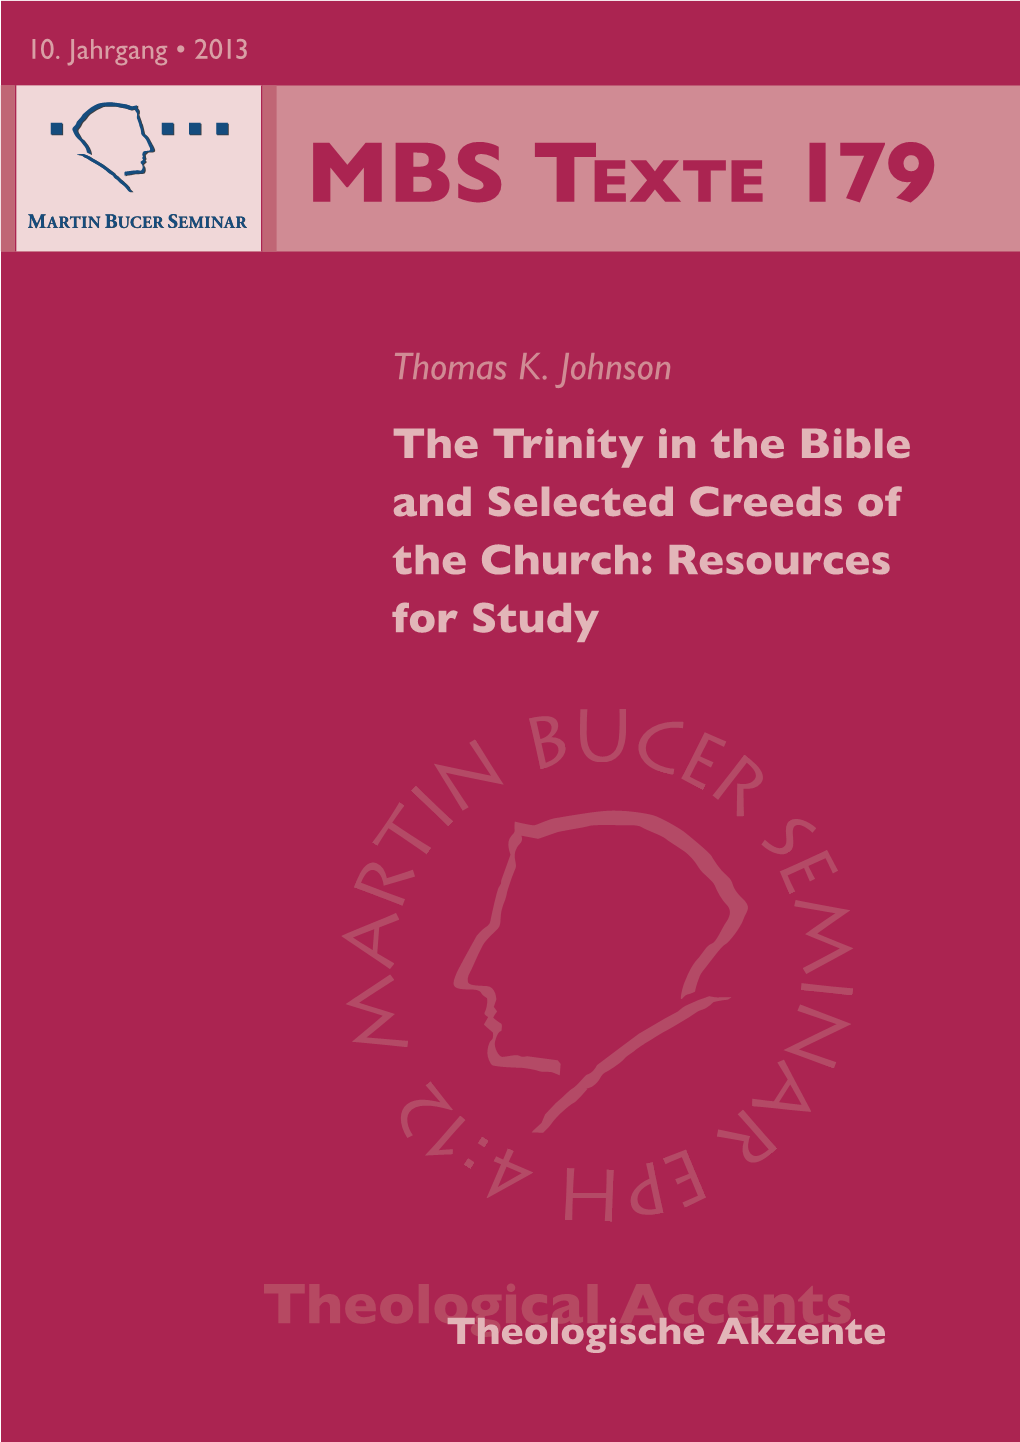 The Trinity in the Bible and Selected Creeds of the Church: Resources for Study